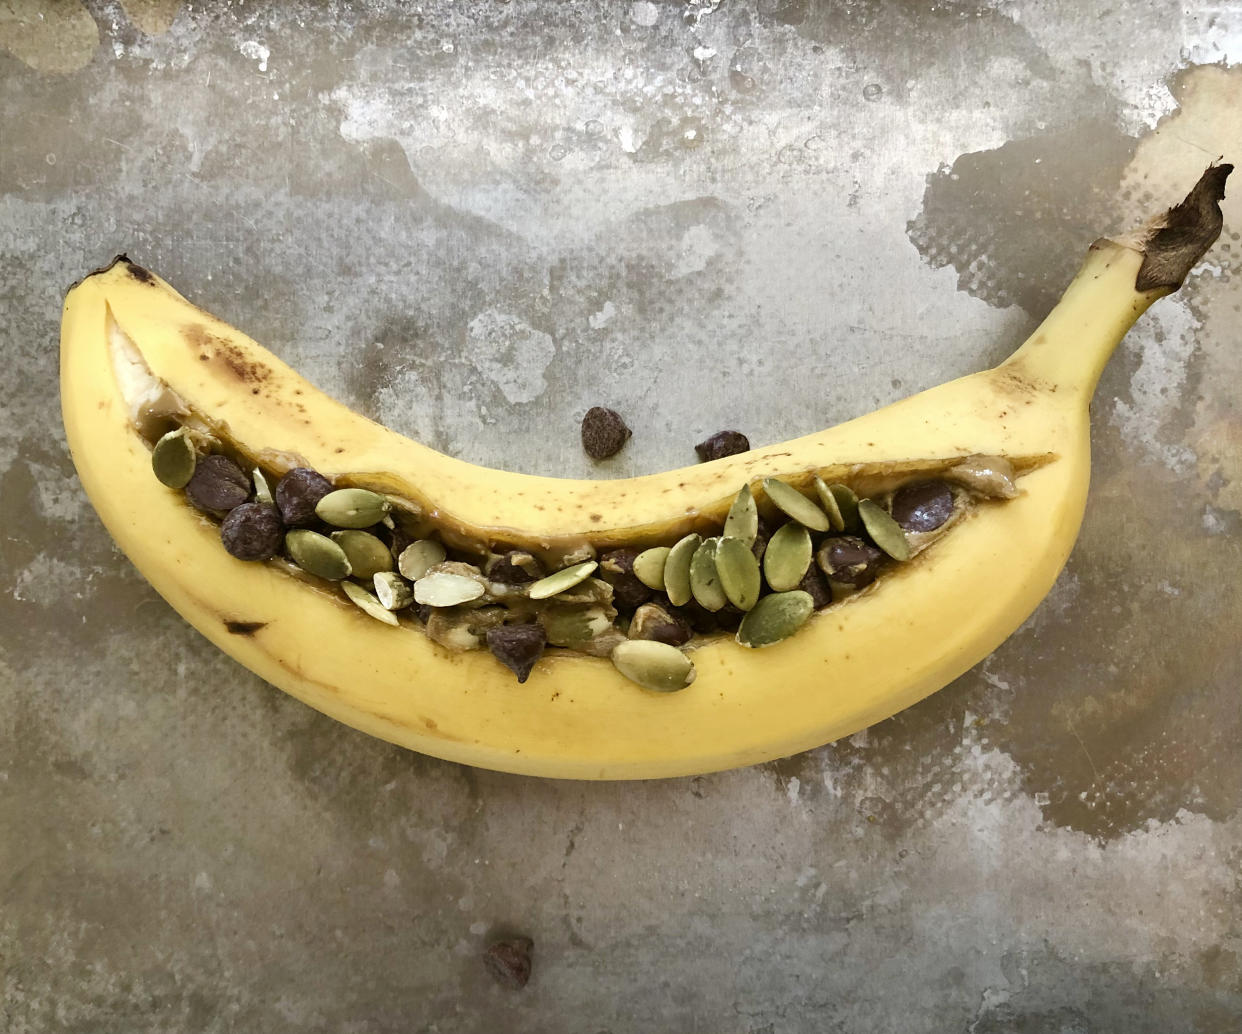 Don’t overstuff your banana, lest it bubble over and be a pain to clean. (Heather Martin)